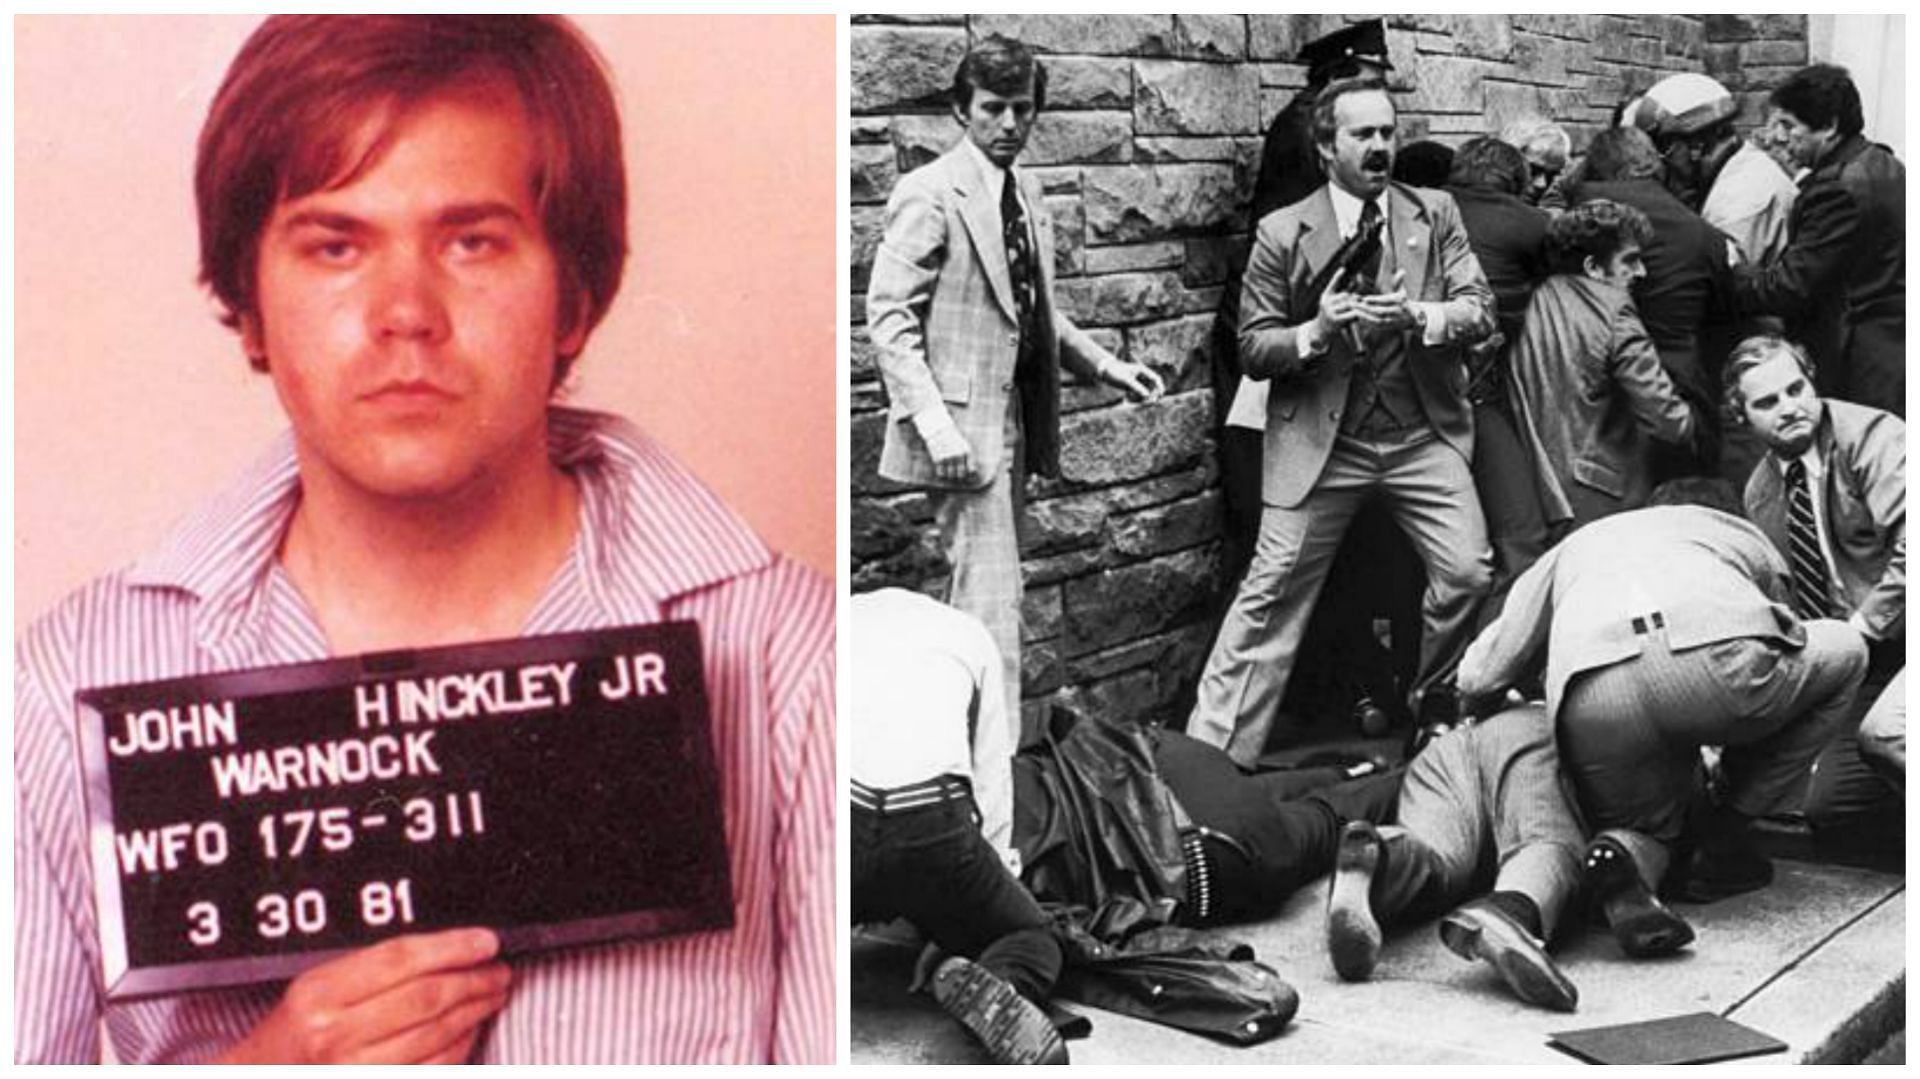 John Hinckley was arrested for attempting to assassinate President Reagan (Image via Getty Images)